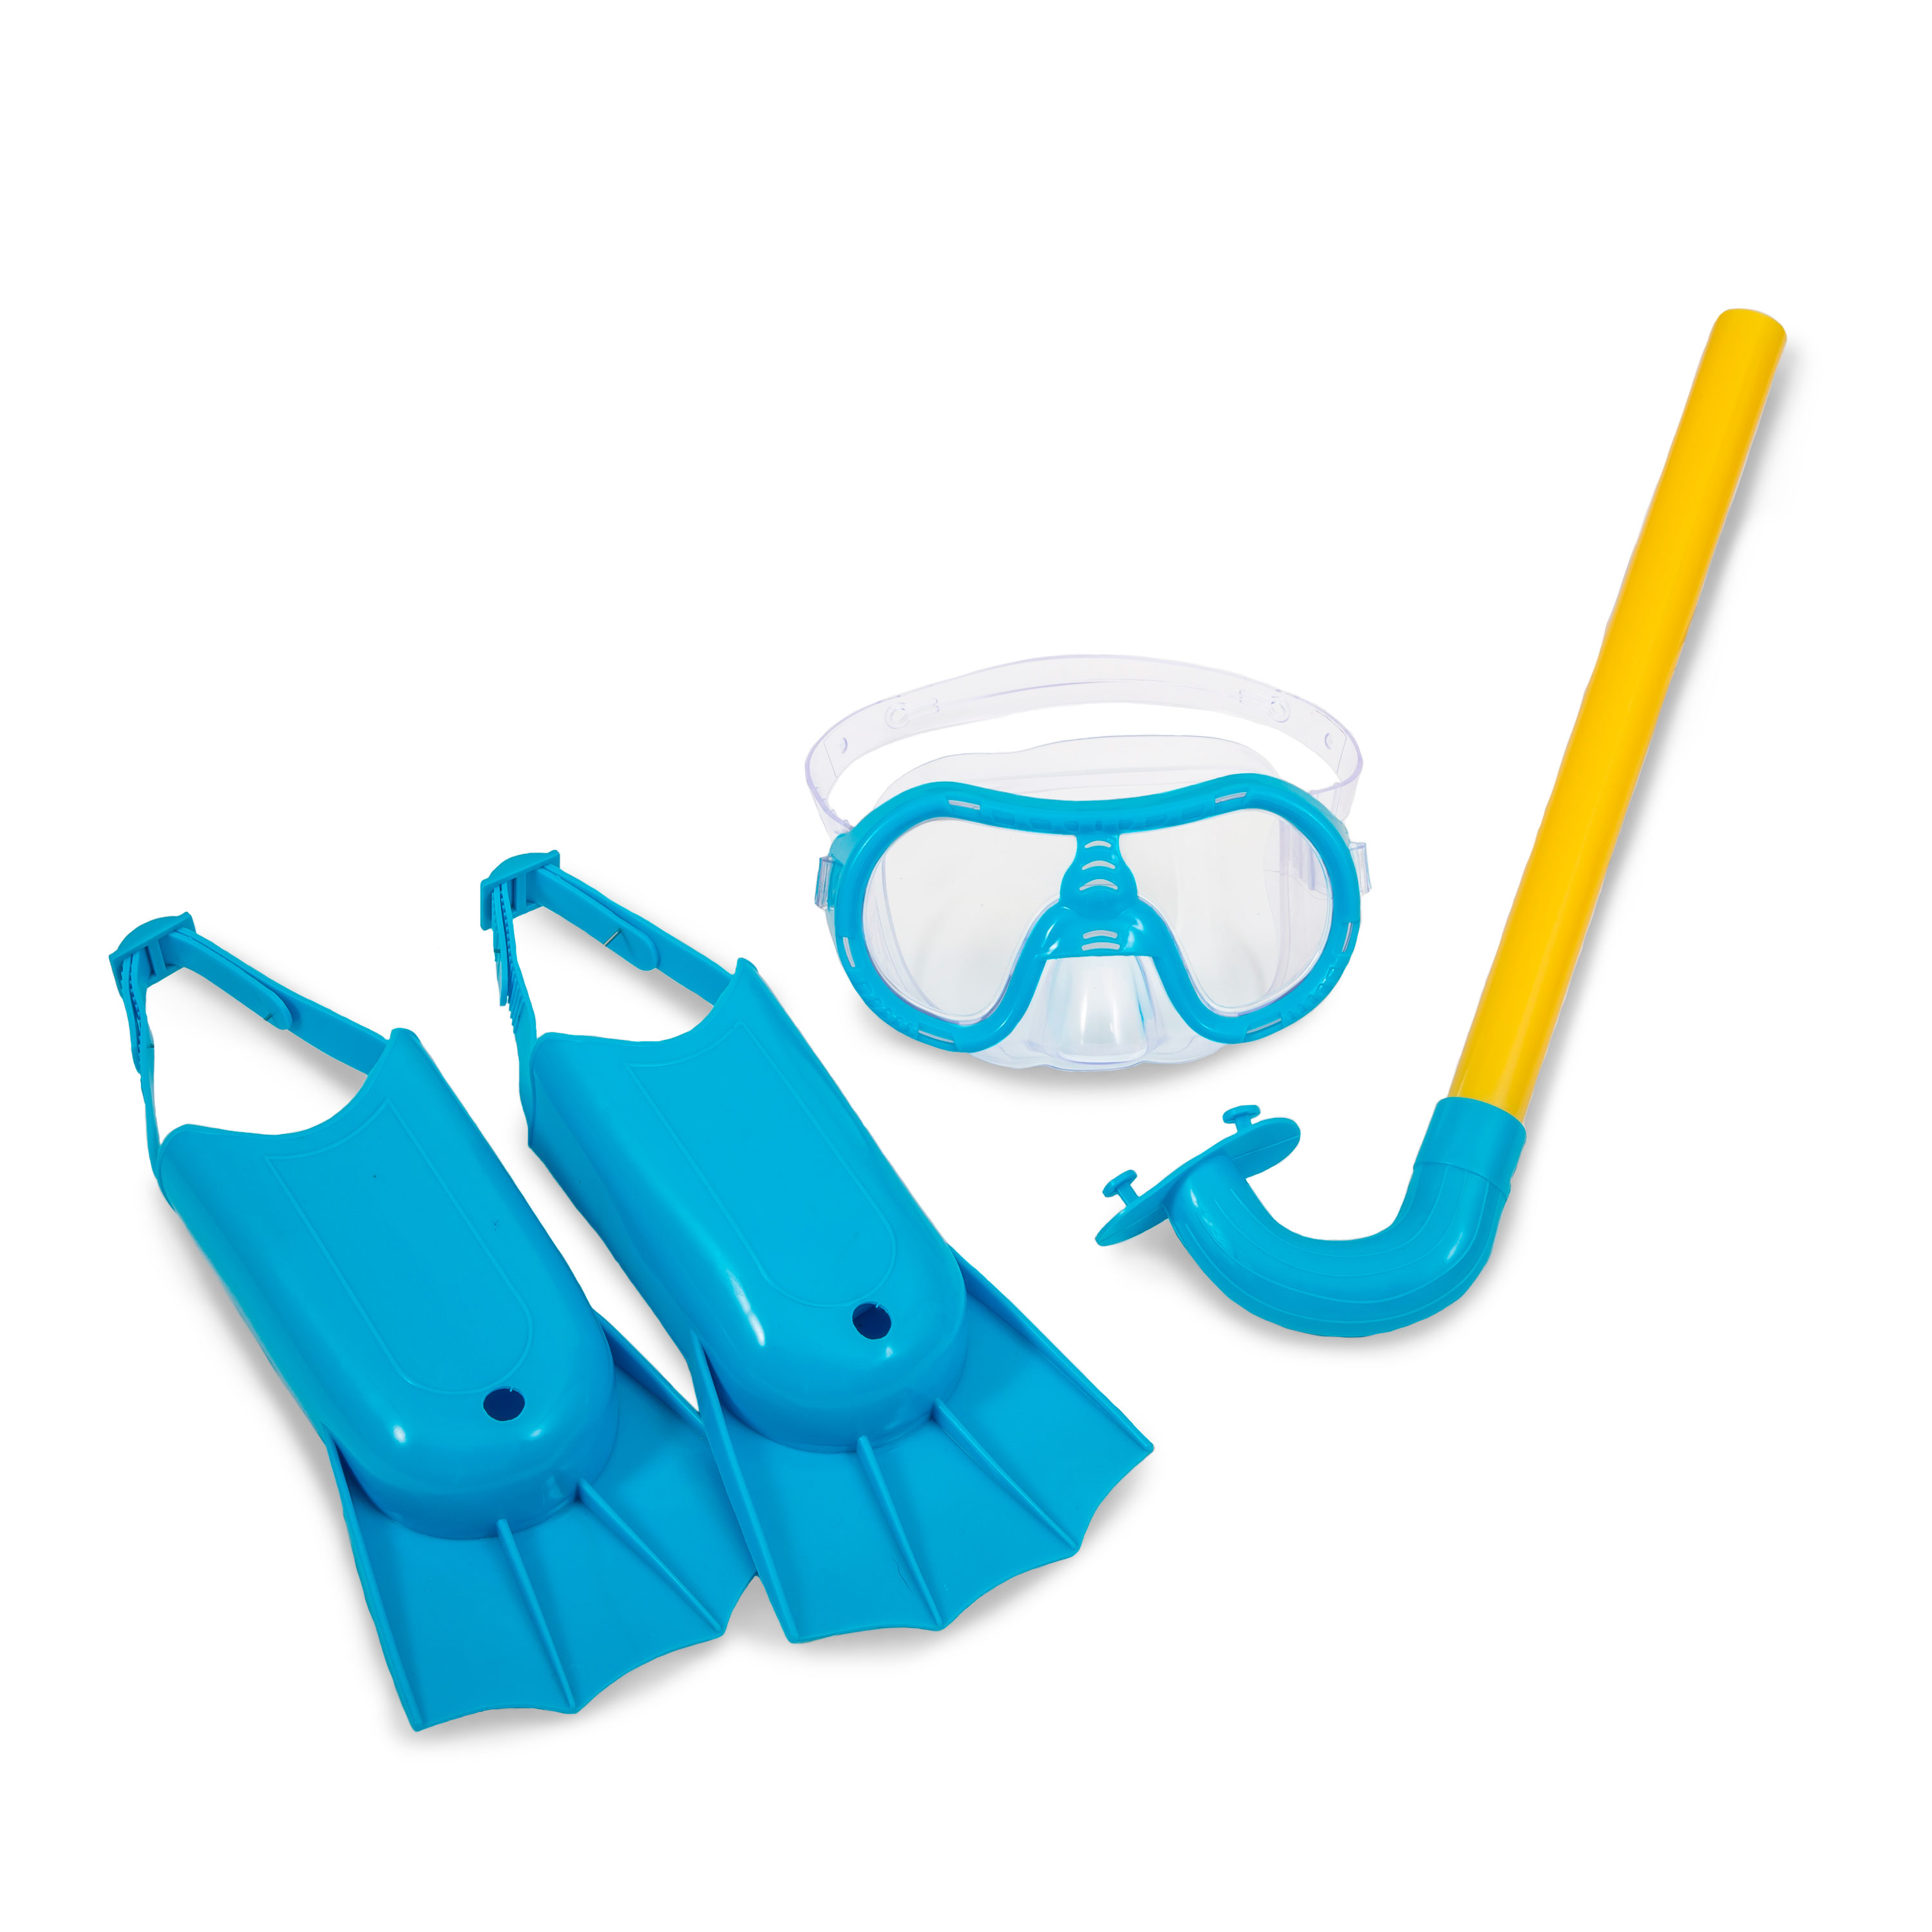 Dolfino Octopus Blue Unisex Dive Set for Children, Includes 5 Pieces, Hypoallergenic and Latex-Free - image 5 of 8